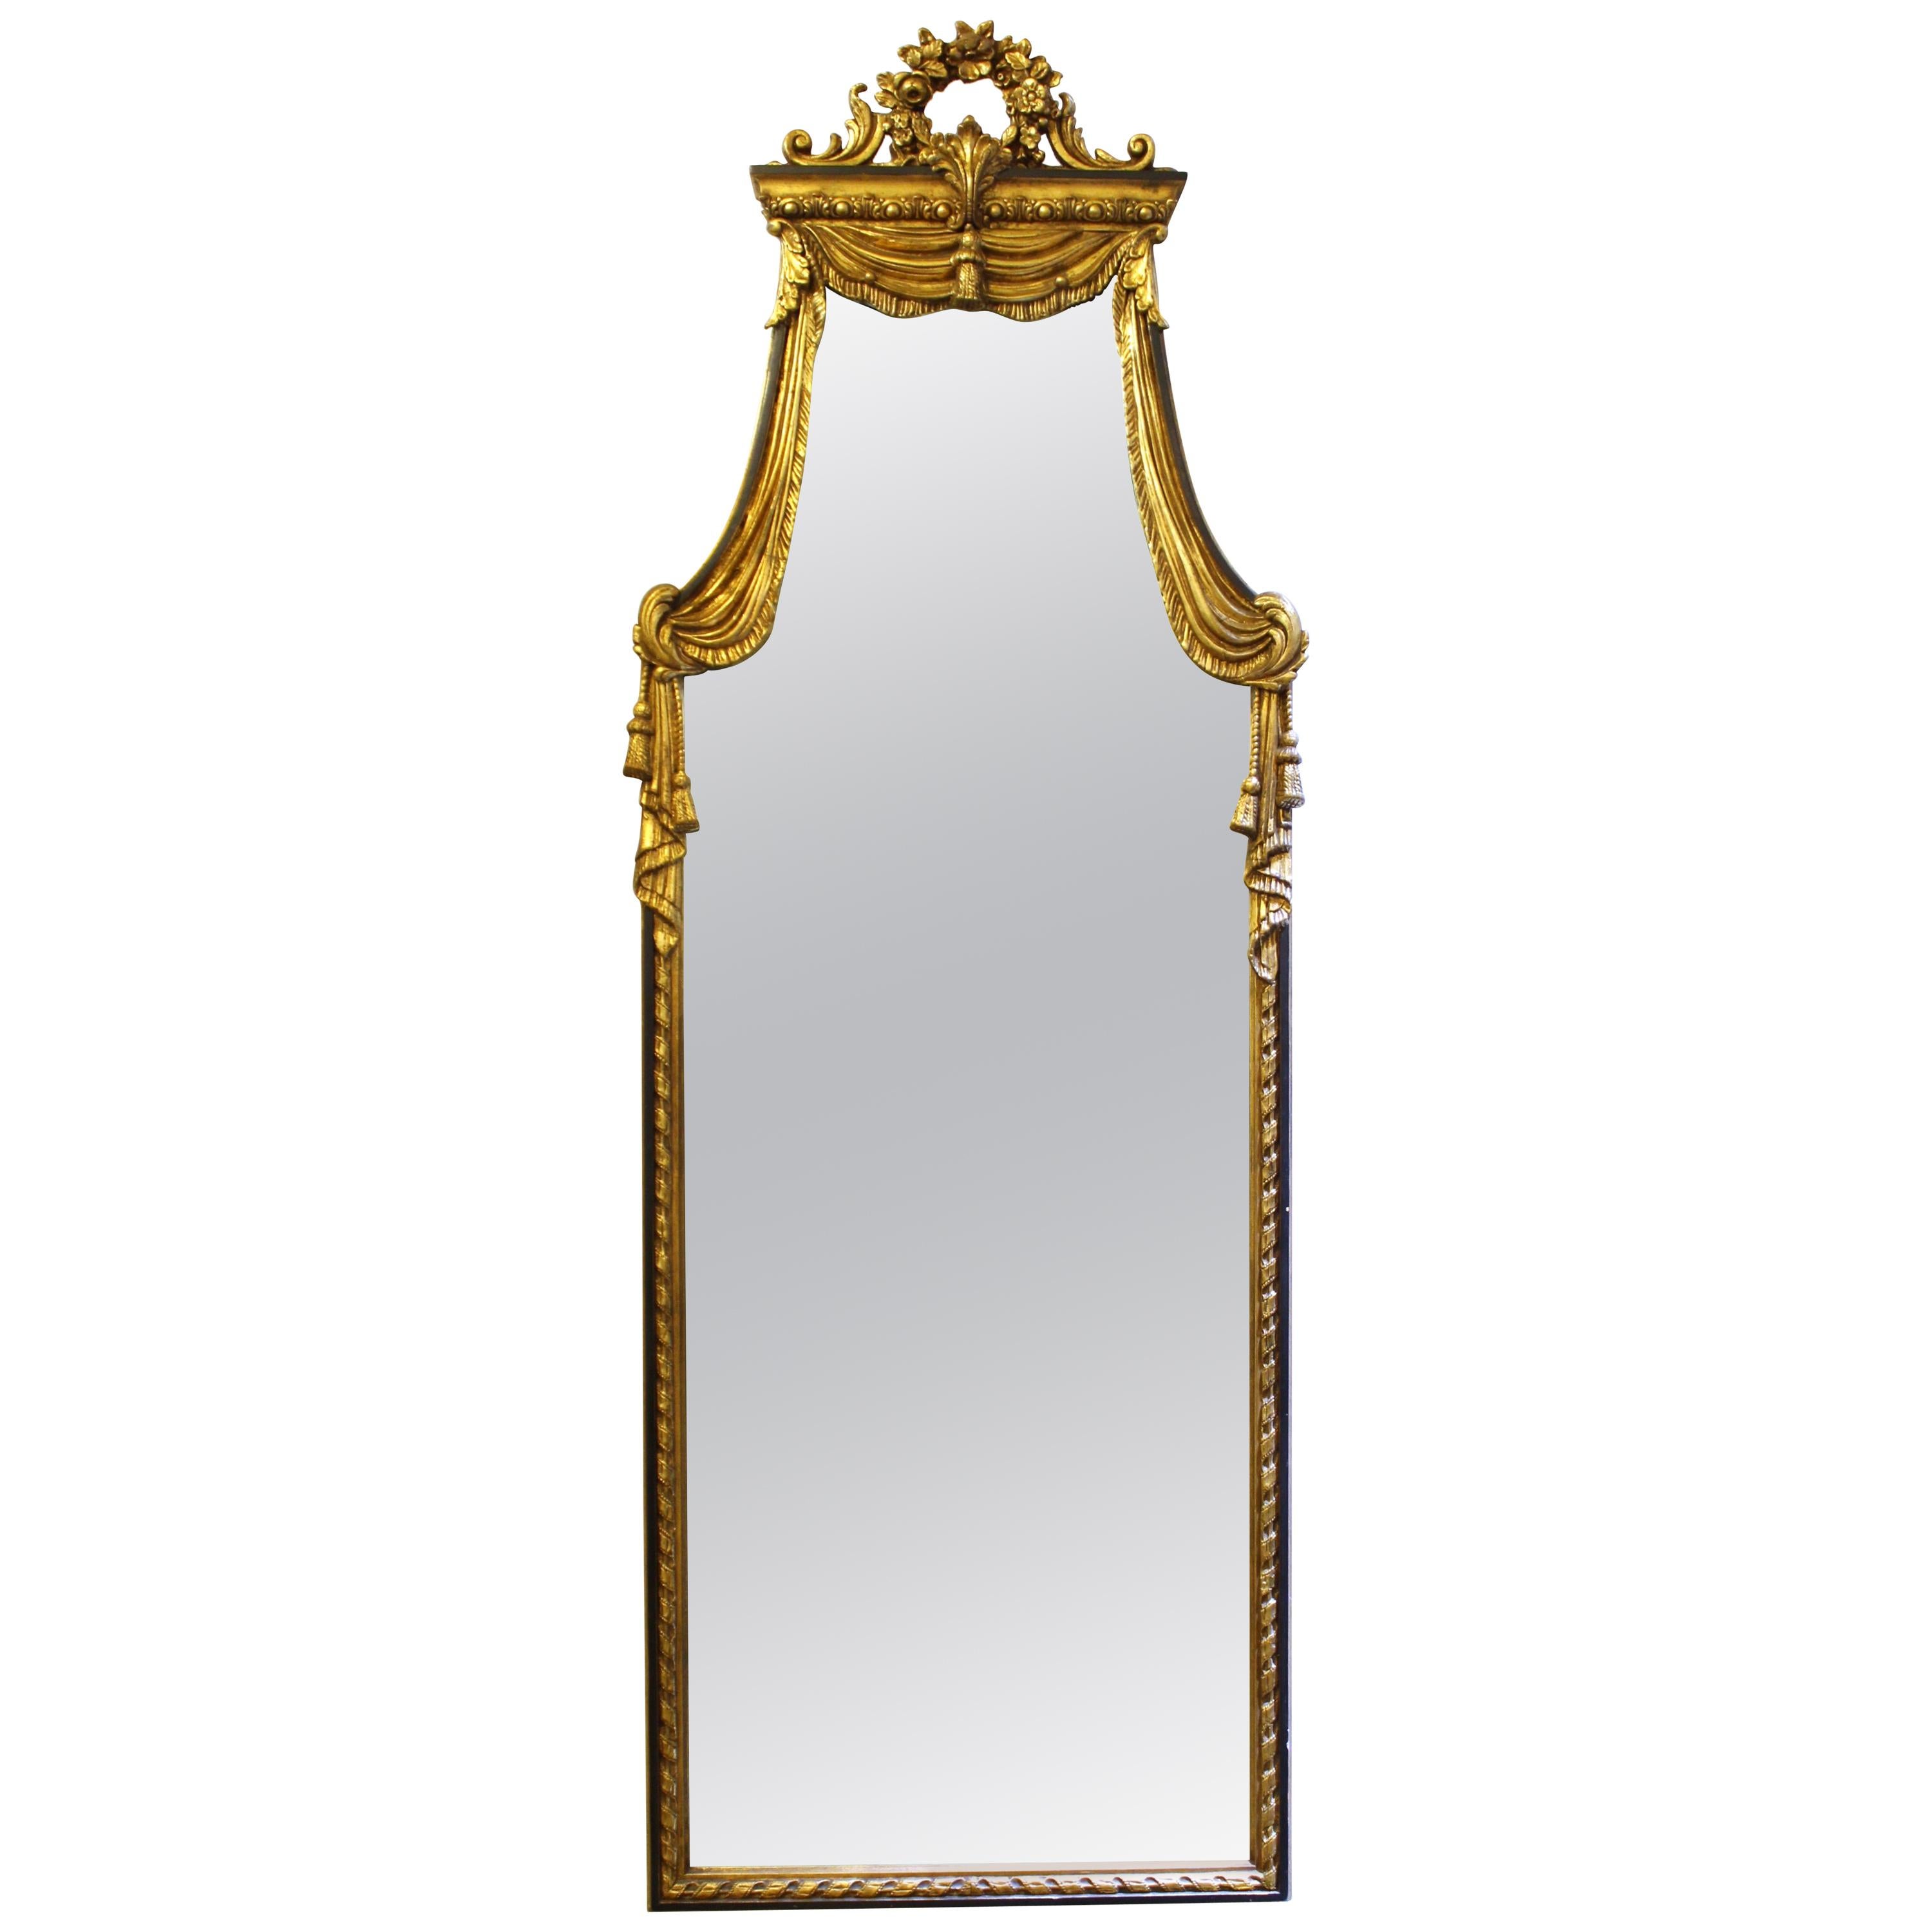 Neoclassical Style Wall Mirror in Giltwood